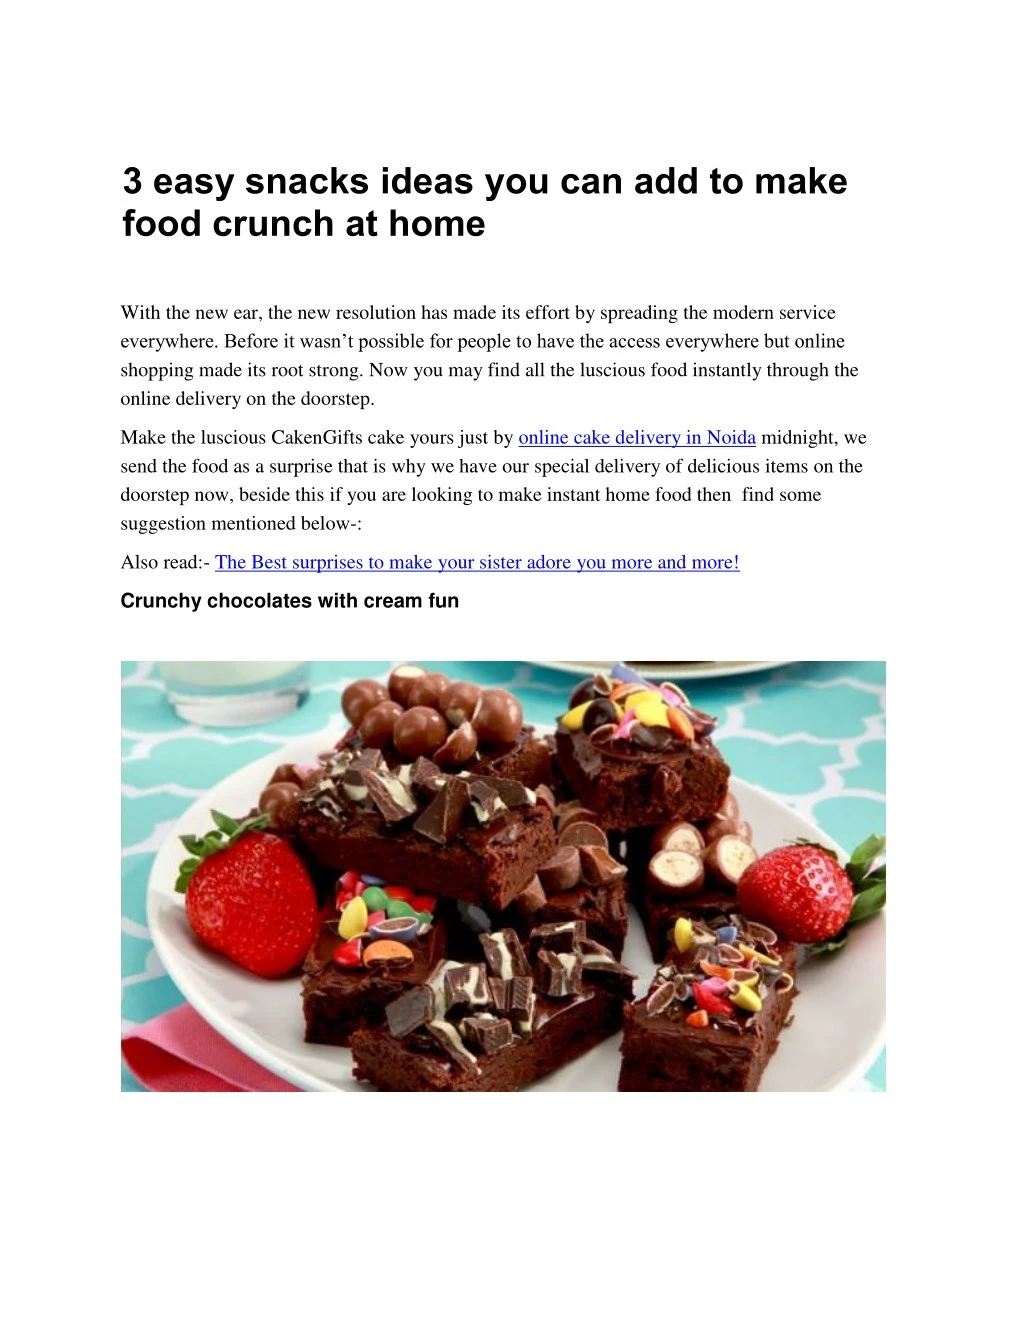 3 easy snacks ideas you can add to make food